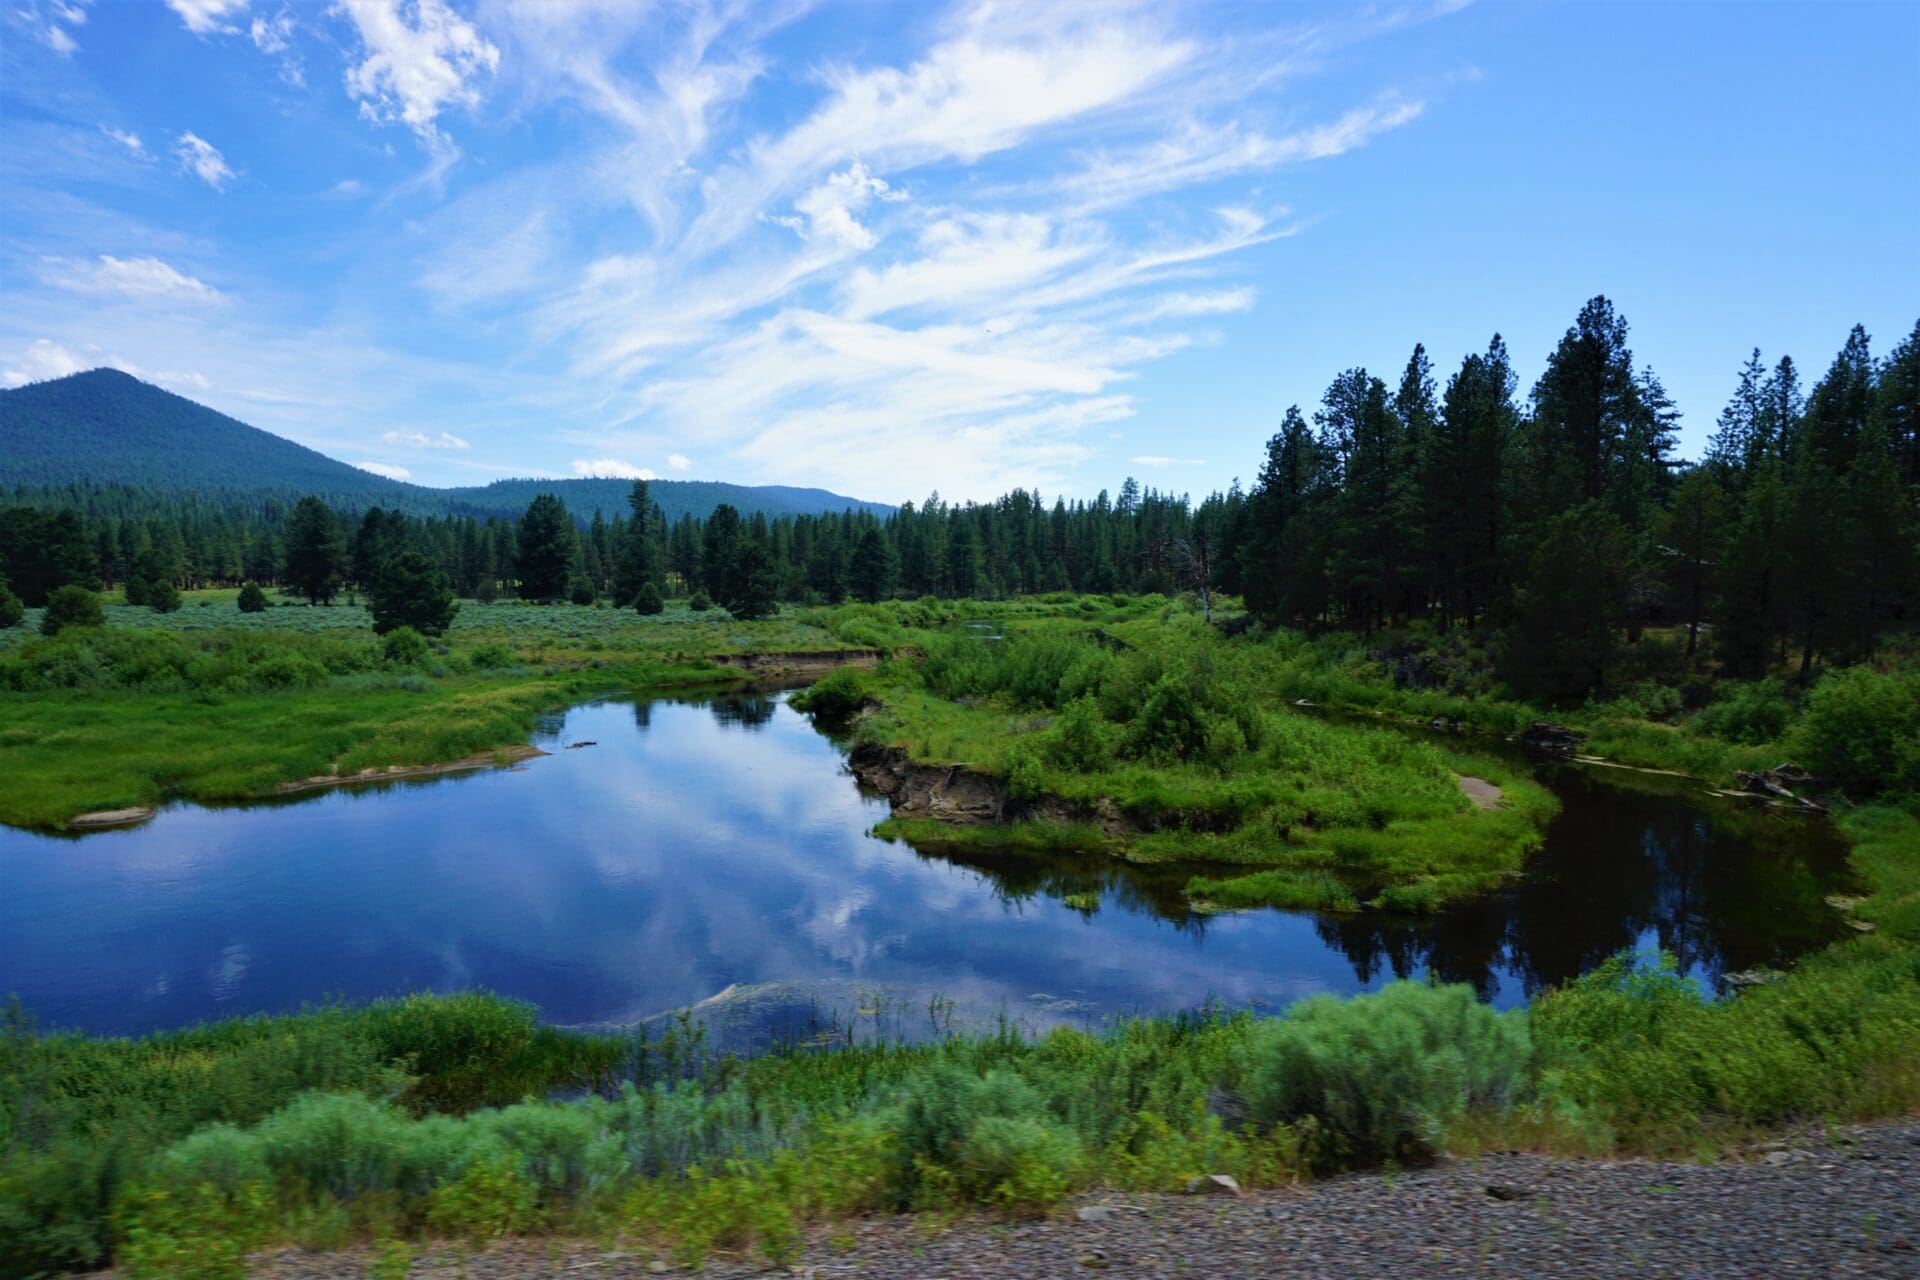 4.79 ACRES IN KLAMATH COUNTY, OREGON ~ GORGEOUS MINI RANCH IN THE MOUNTAINS WITH TREES, VIEWS AND WIDE OPEN SPACES photo 4